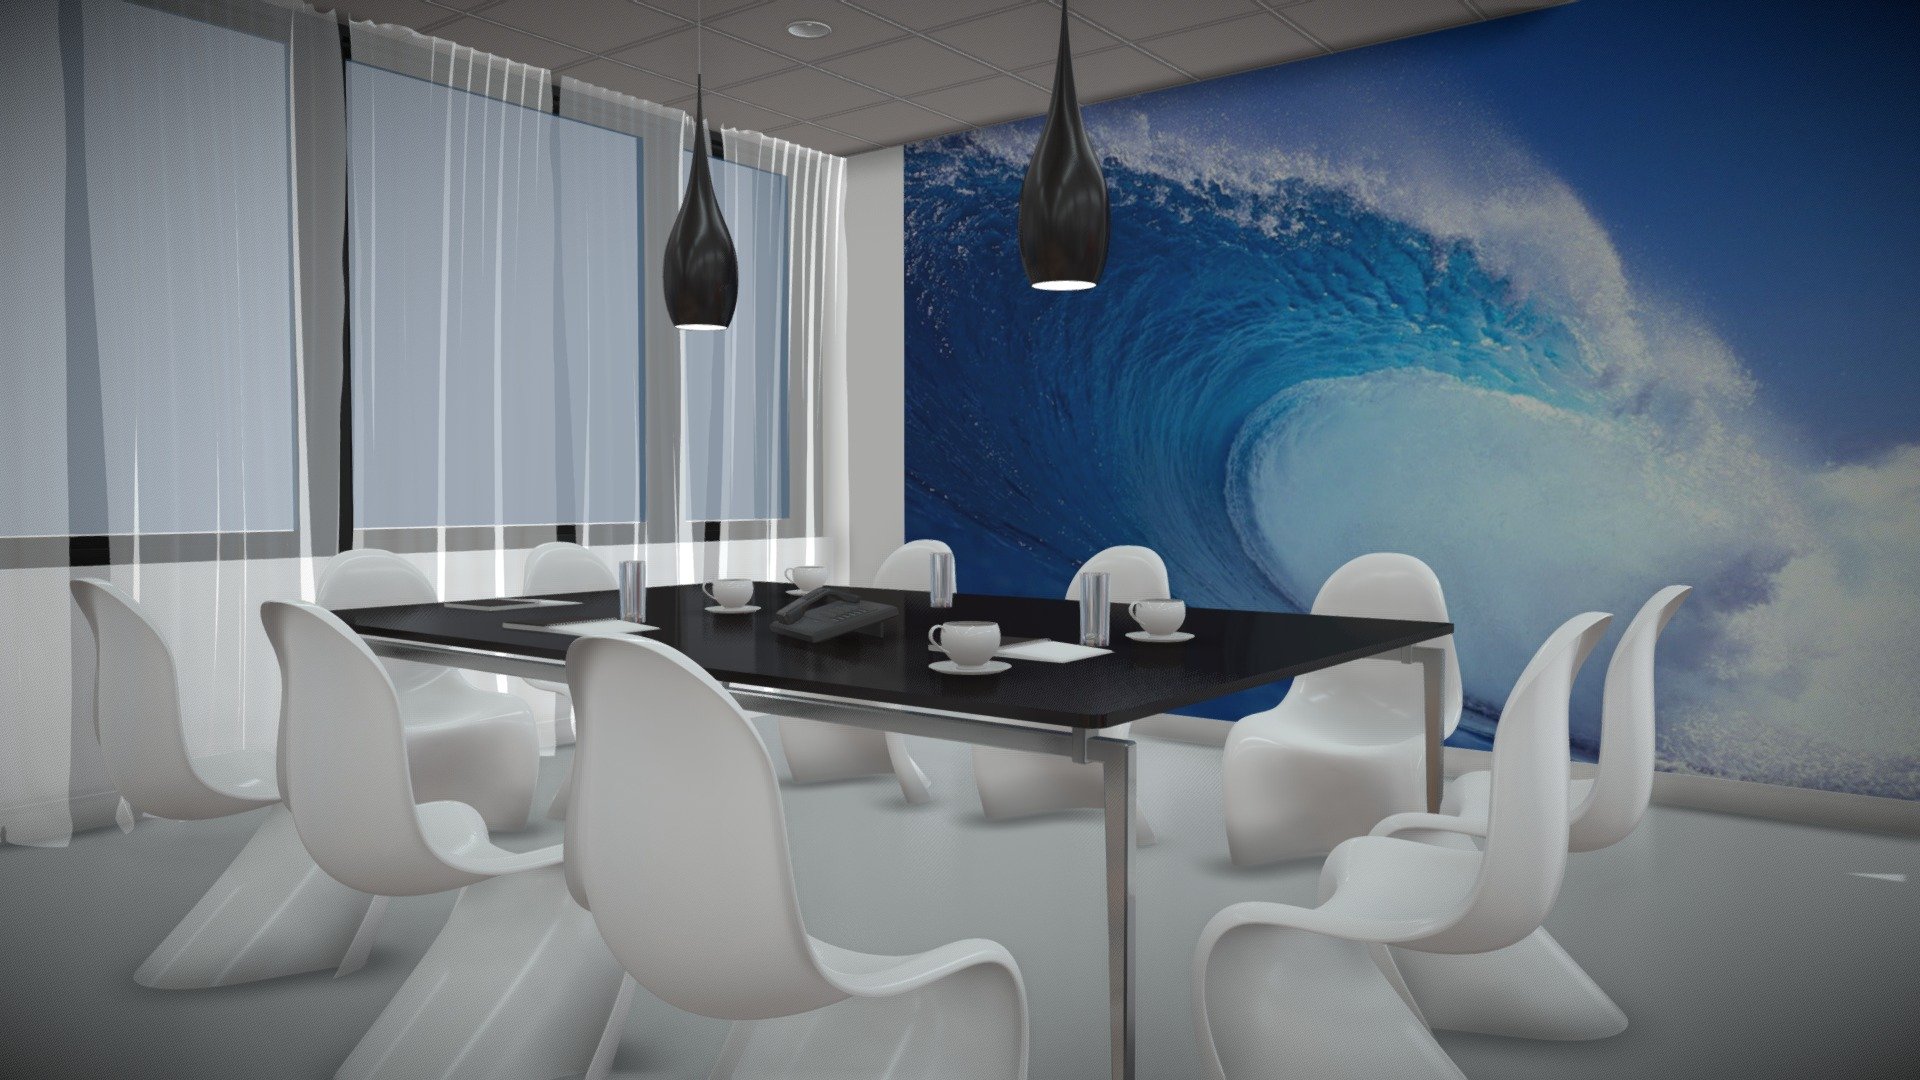 Detailed 3d model of an office meeting room interior.
Lighting set up in included.

Very quick render times 3d model